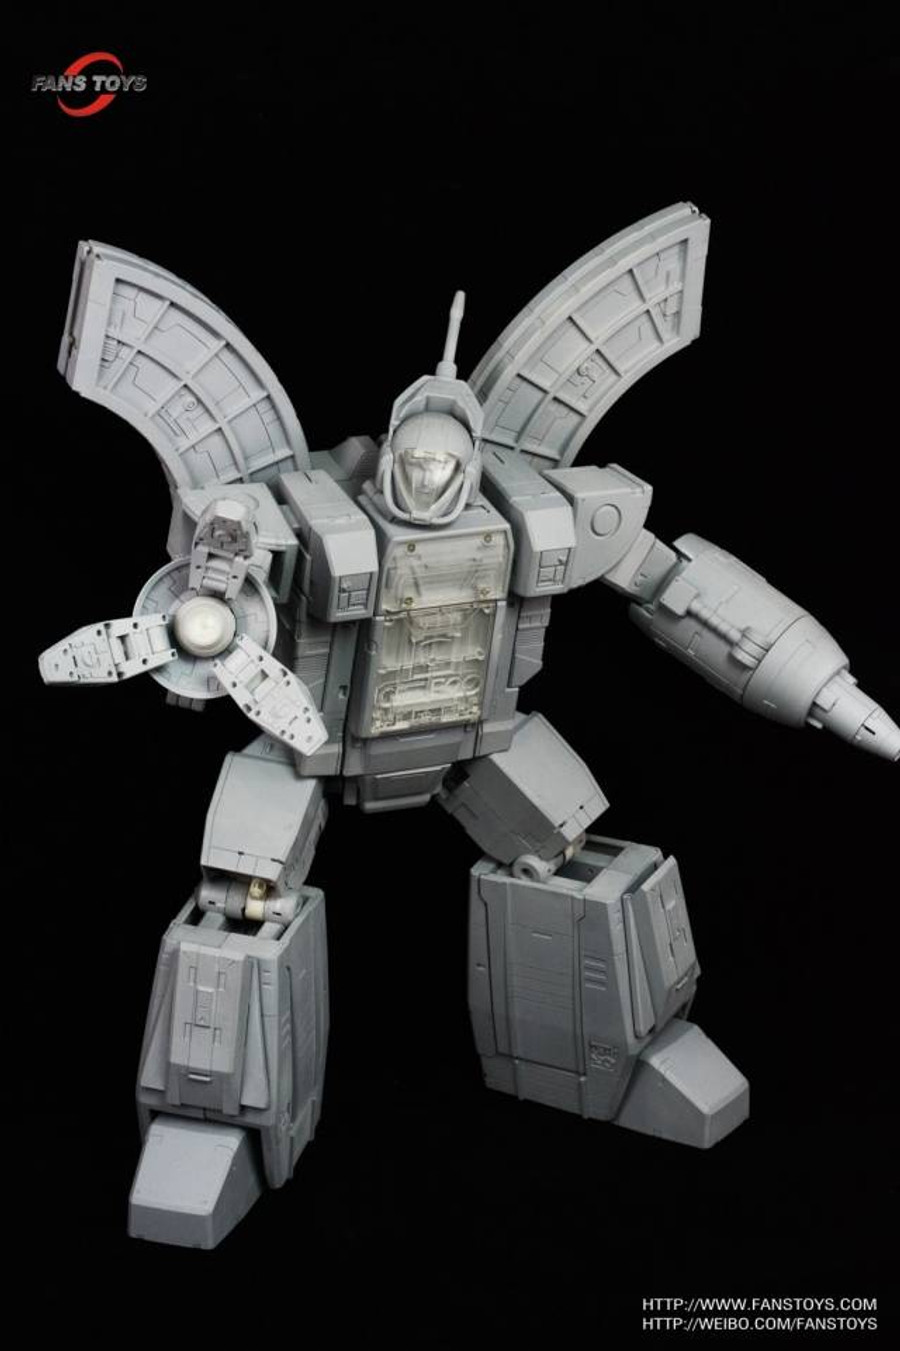 Fans Toys - FT-20A - Terminus Giganticus - Pack A